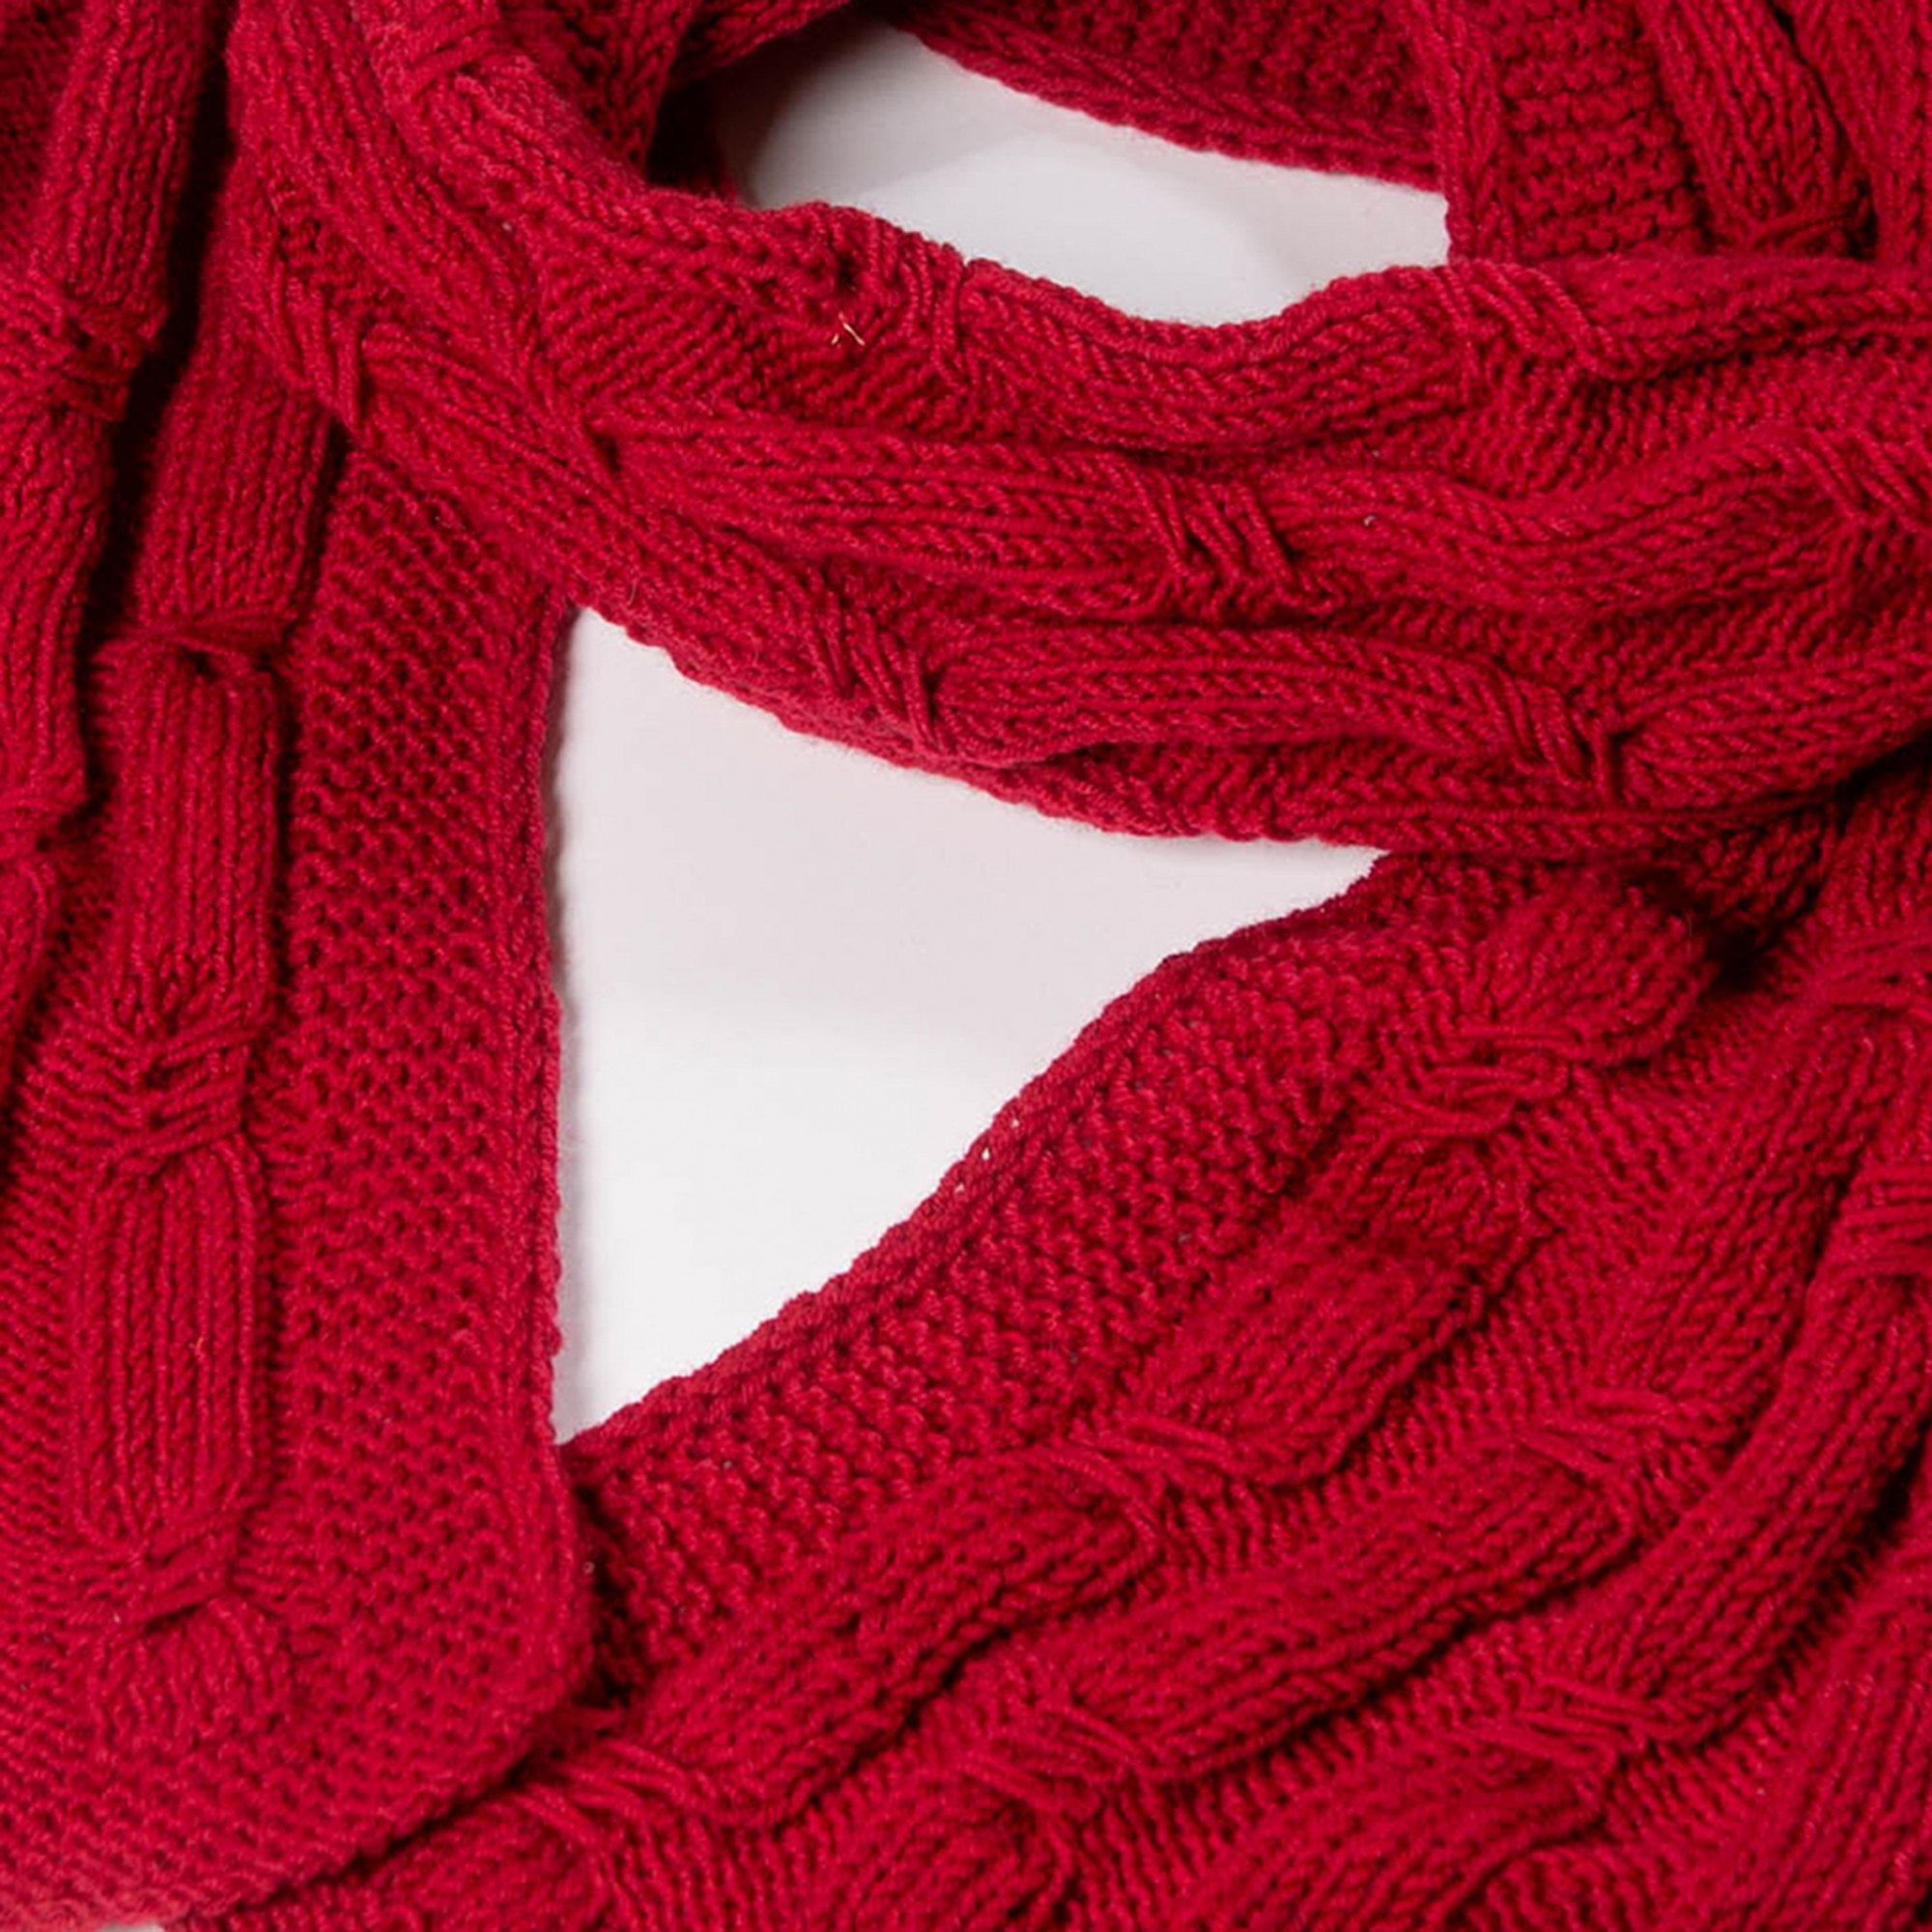 Buy Hand-knitted red scarf made of high quality wool